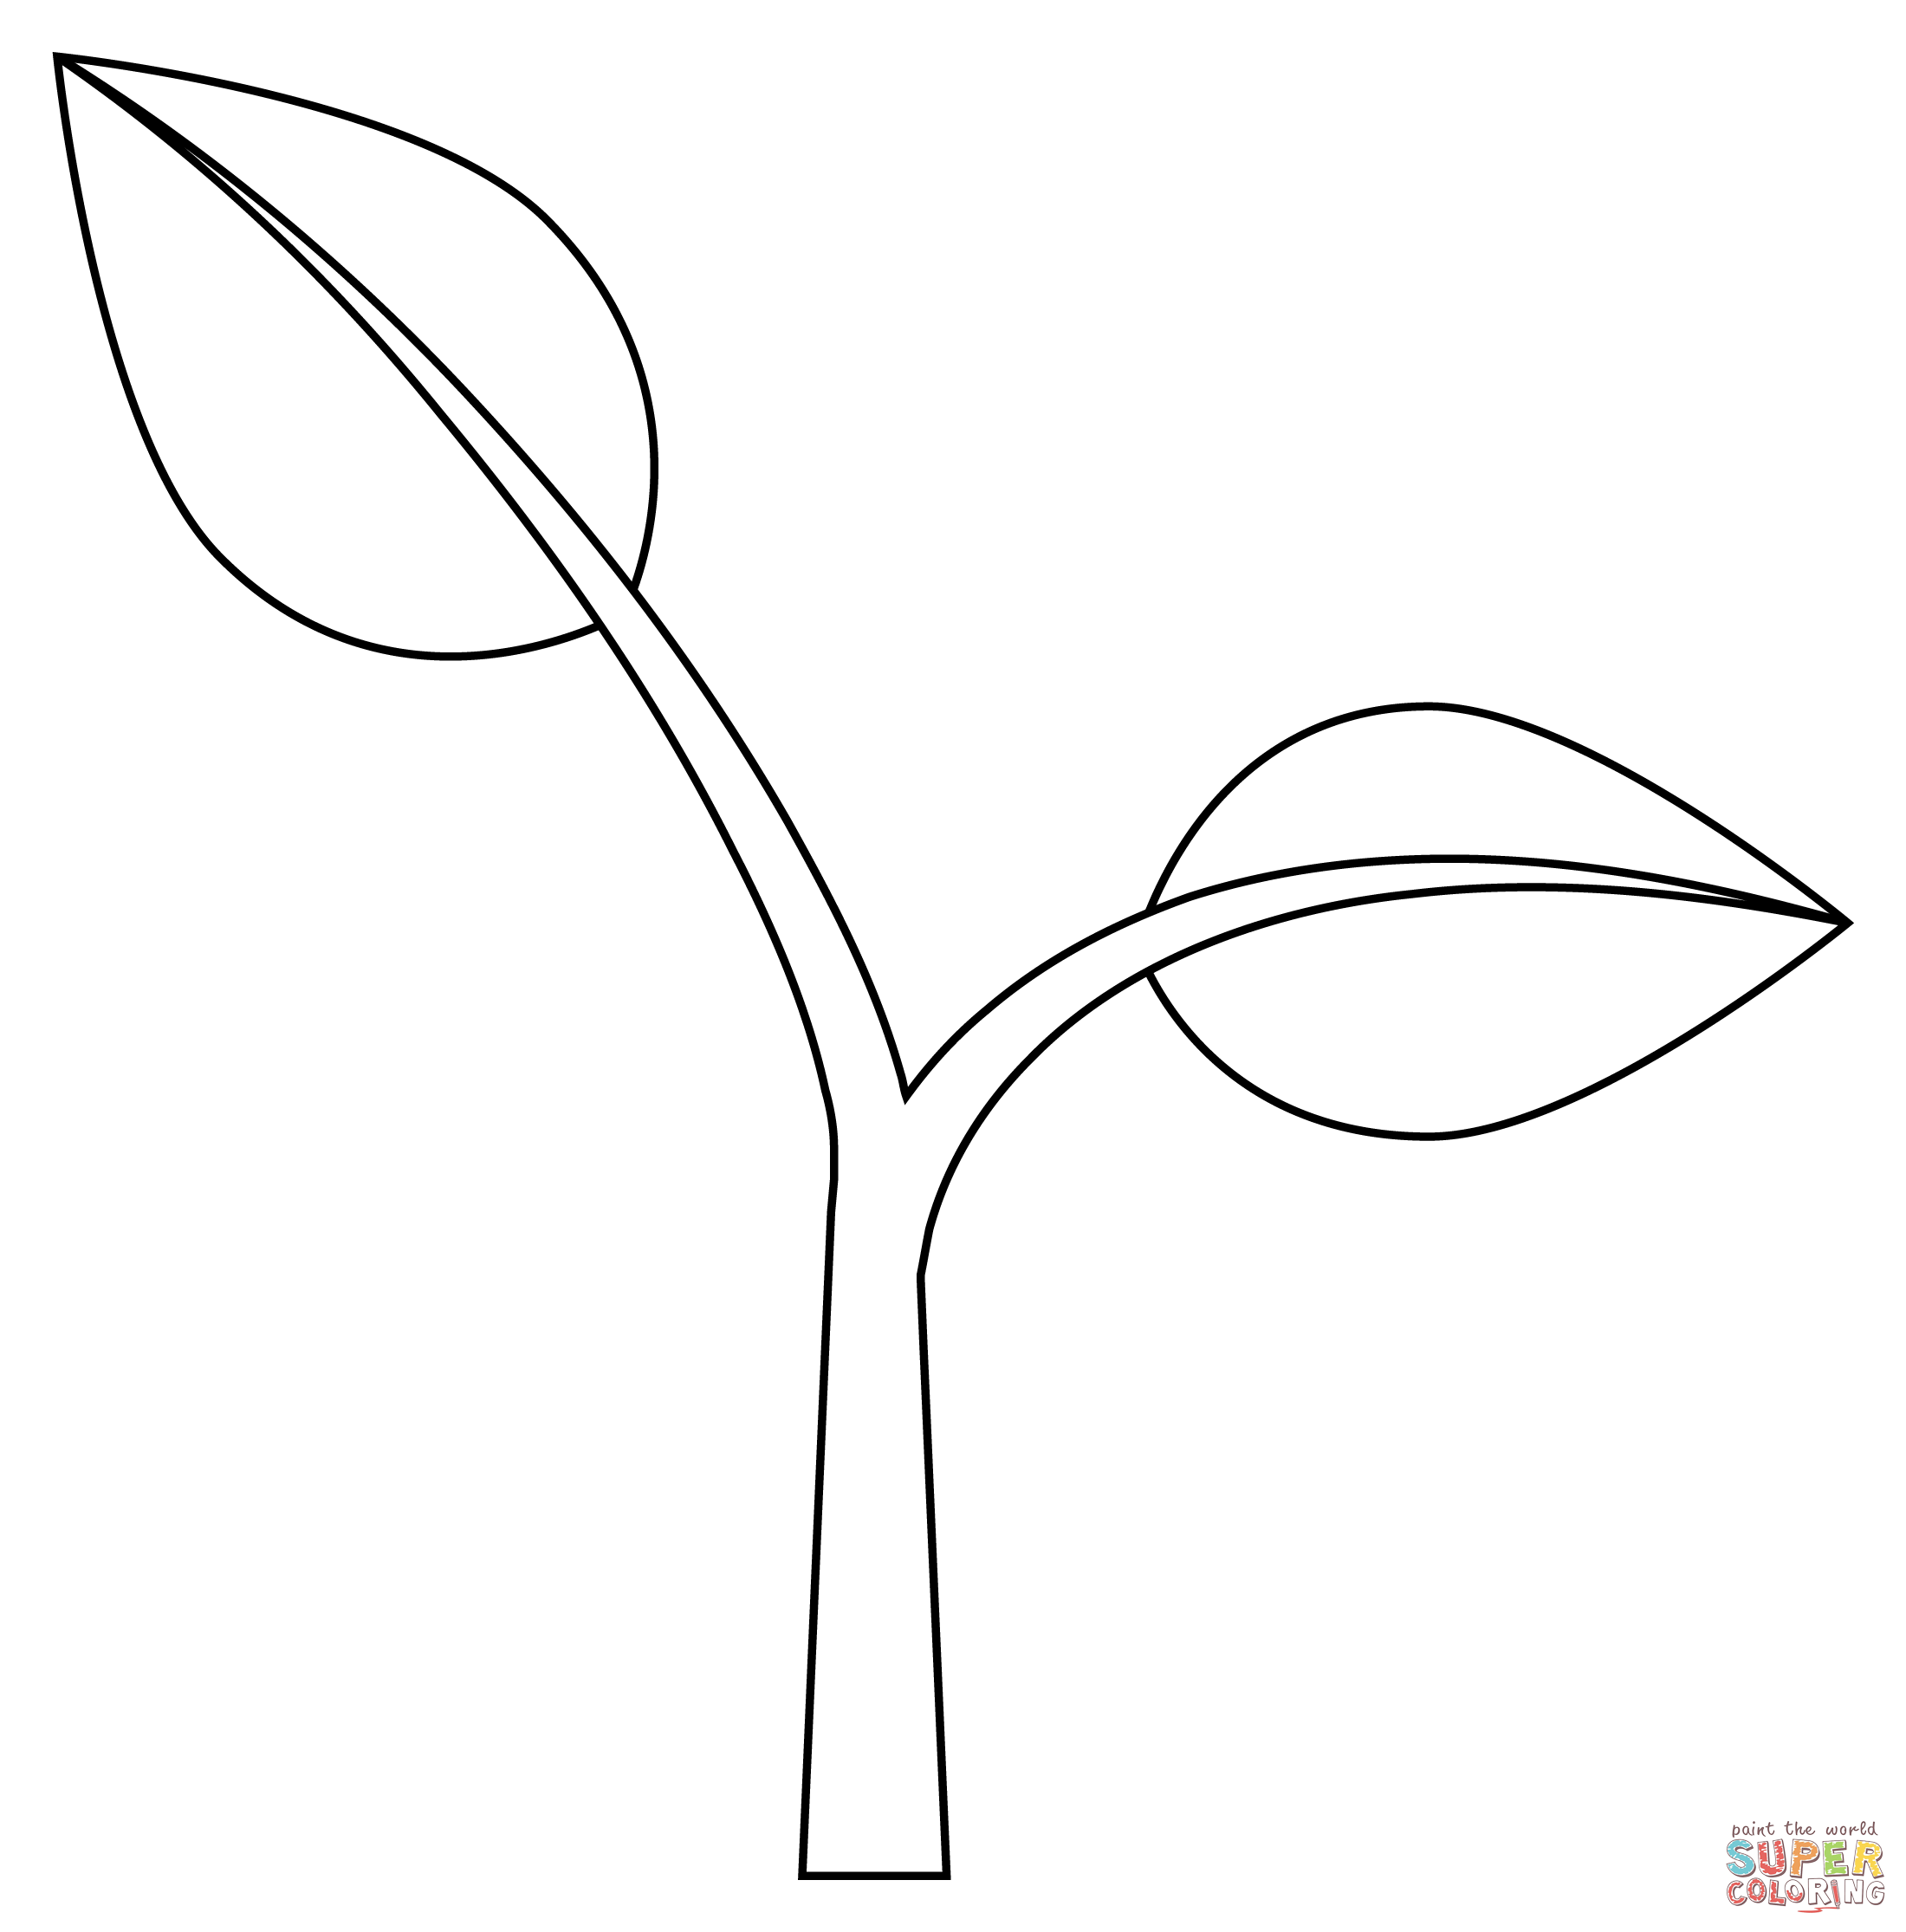 Seedling coloring page free printable coloring pages